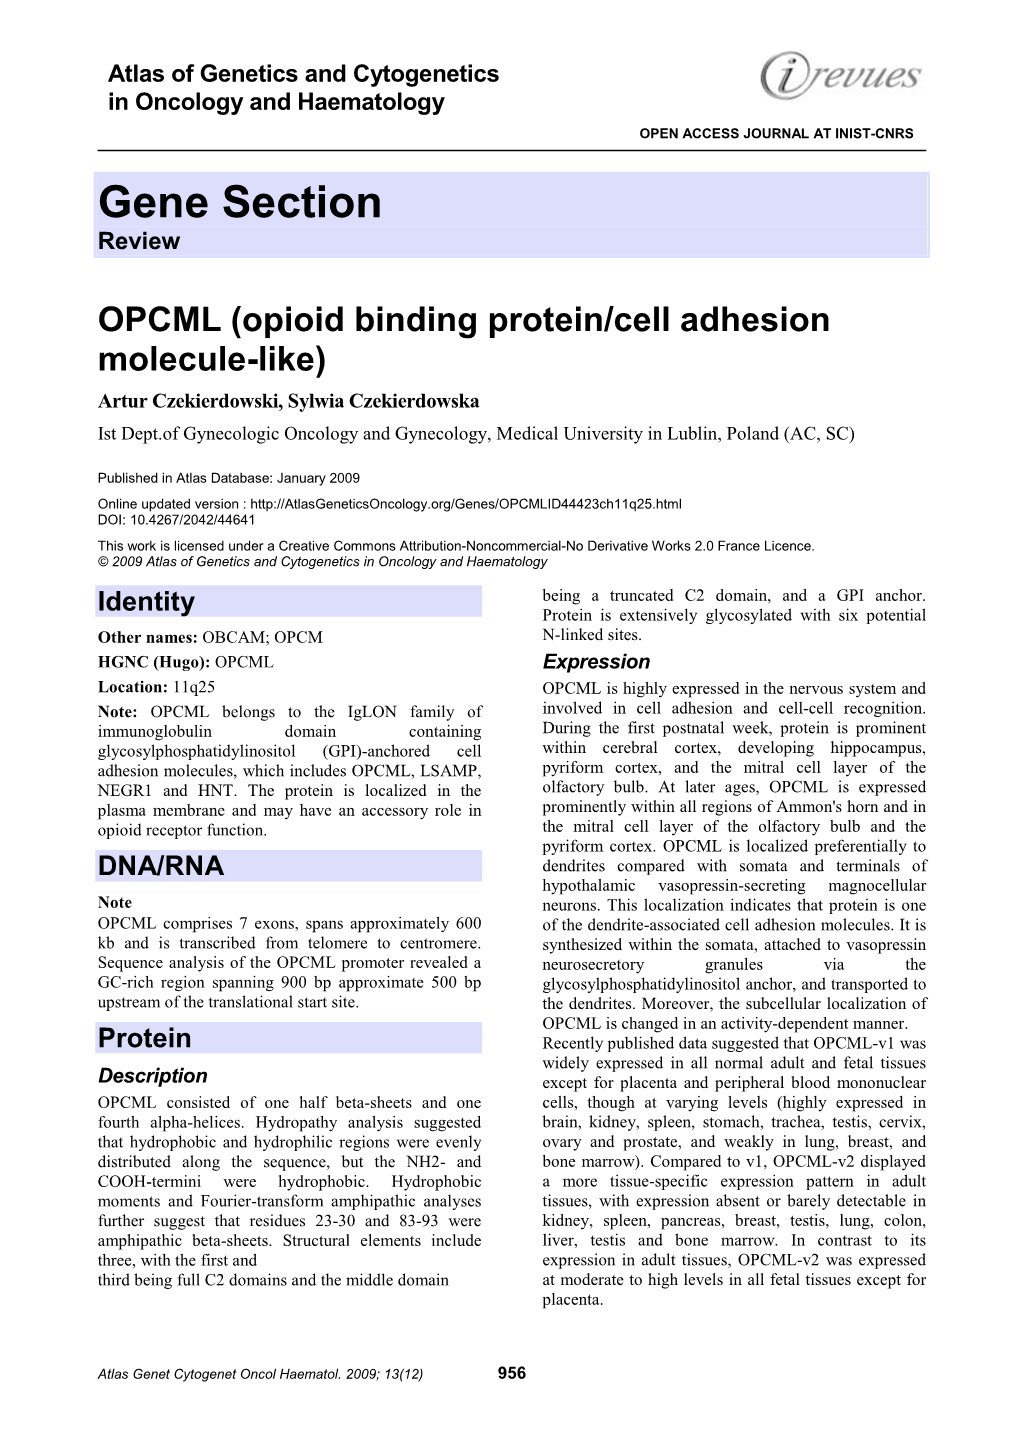 OPCML (Opioid Binding Protein/Cell Adhesion